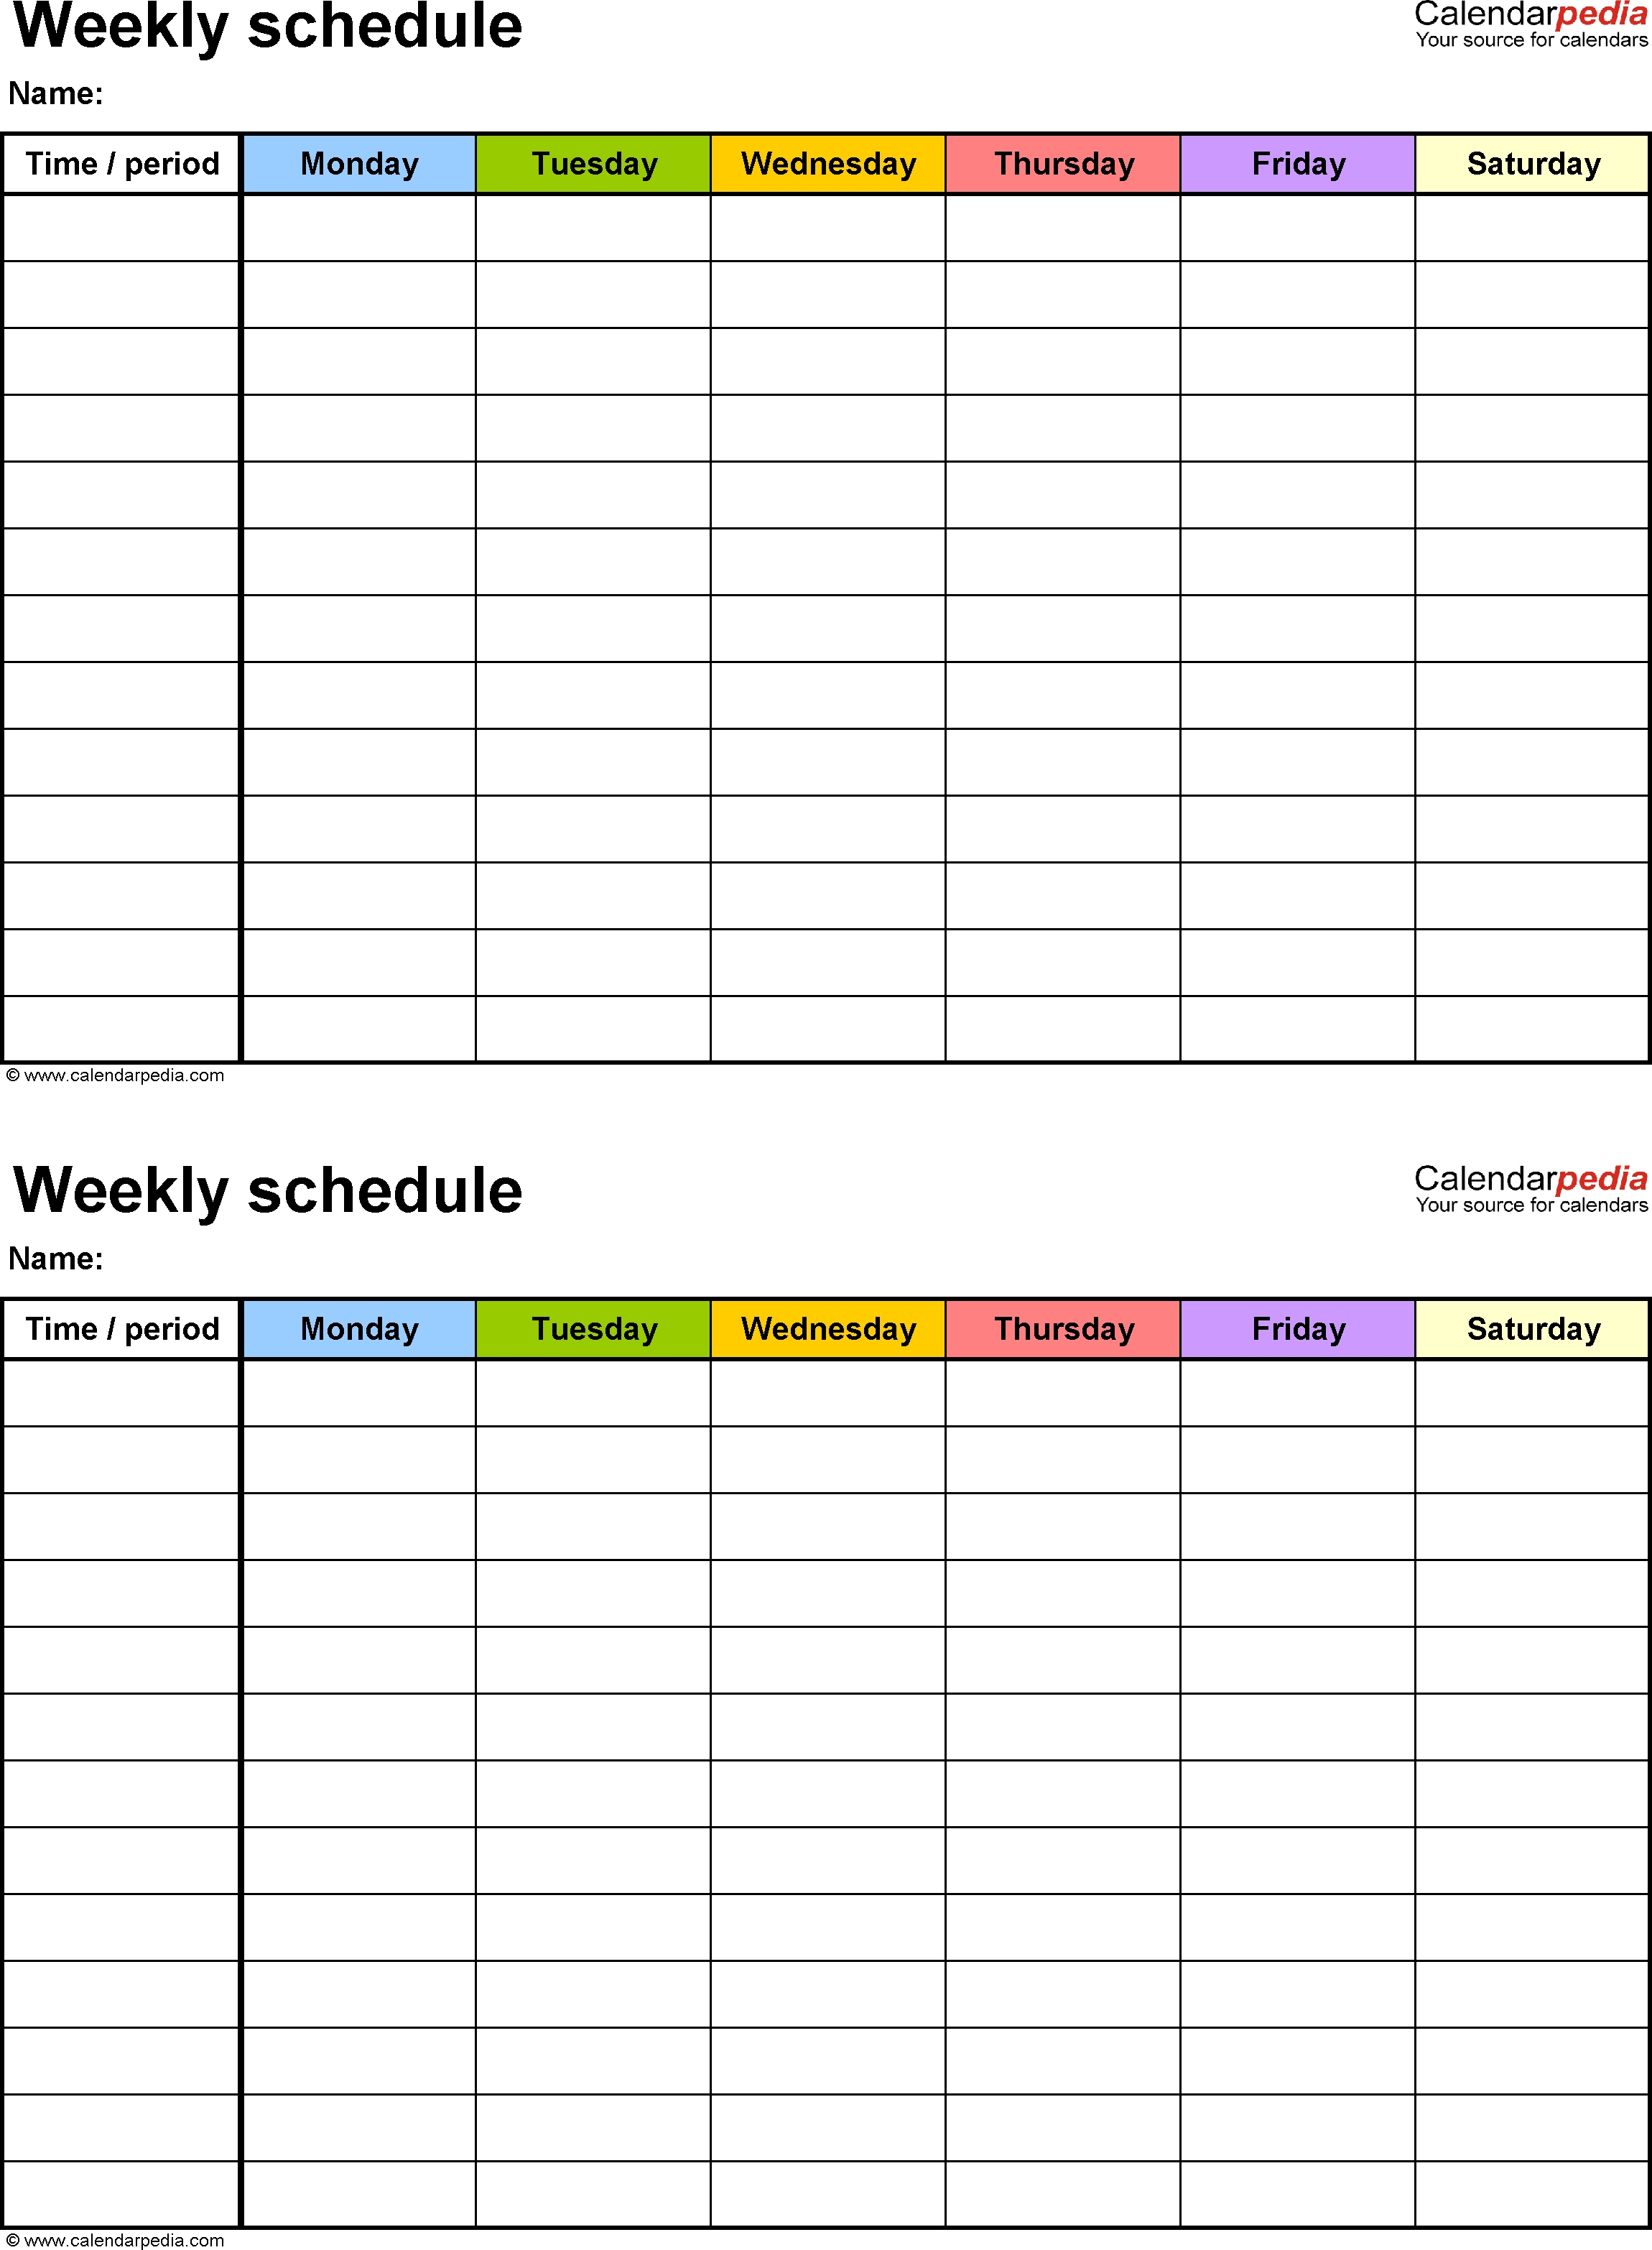 Free Weekly Schedule Templates For Word - 18 Templates intended for Weekly Schedule Monday - Sunday